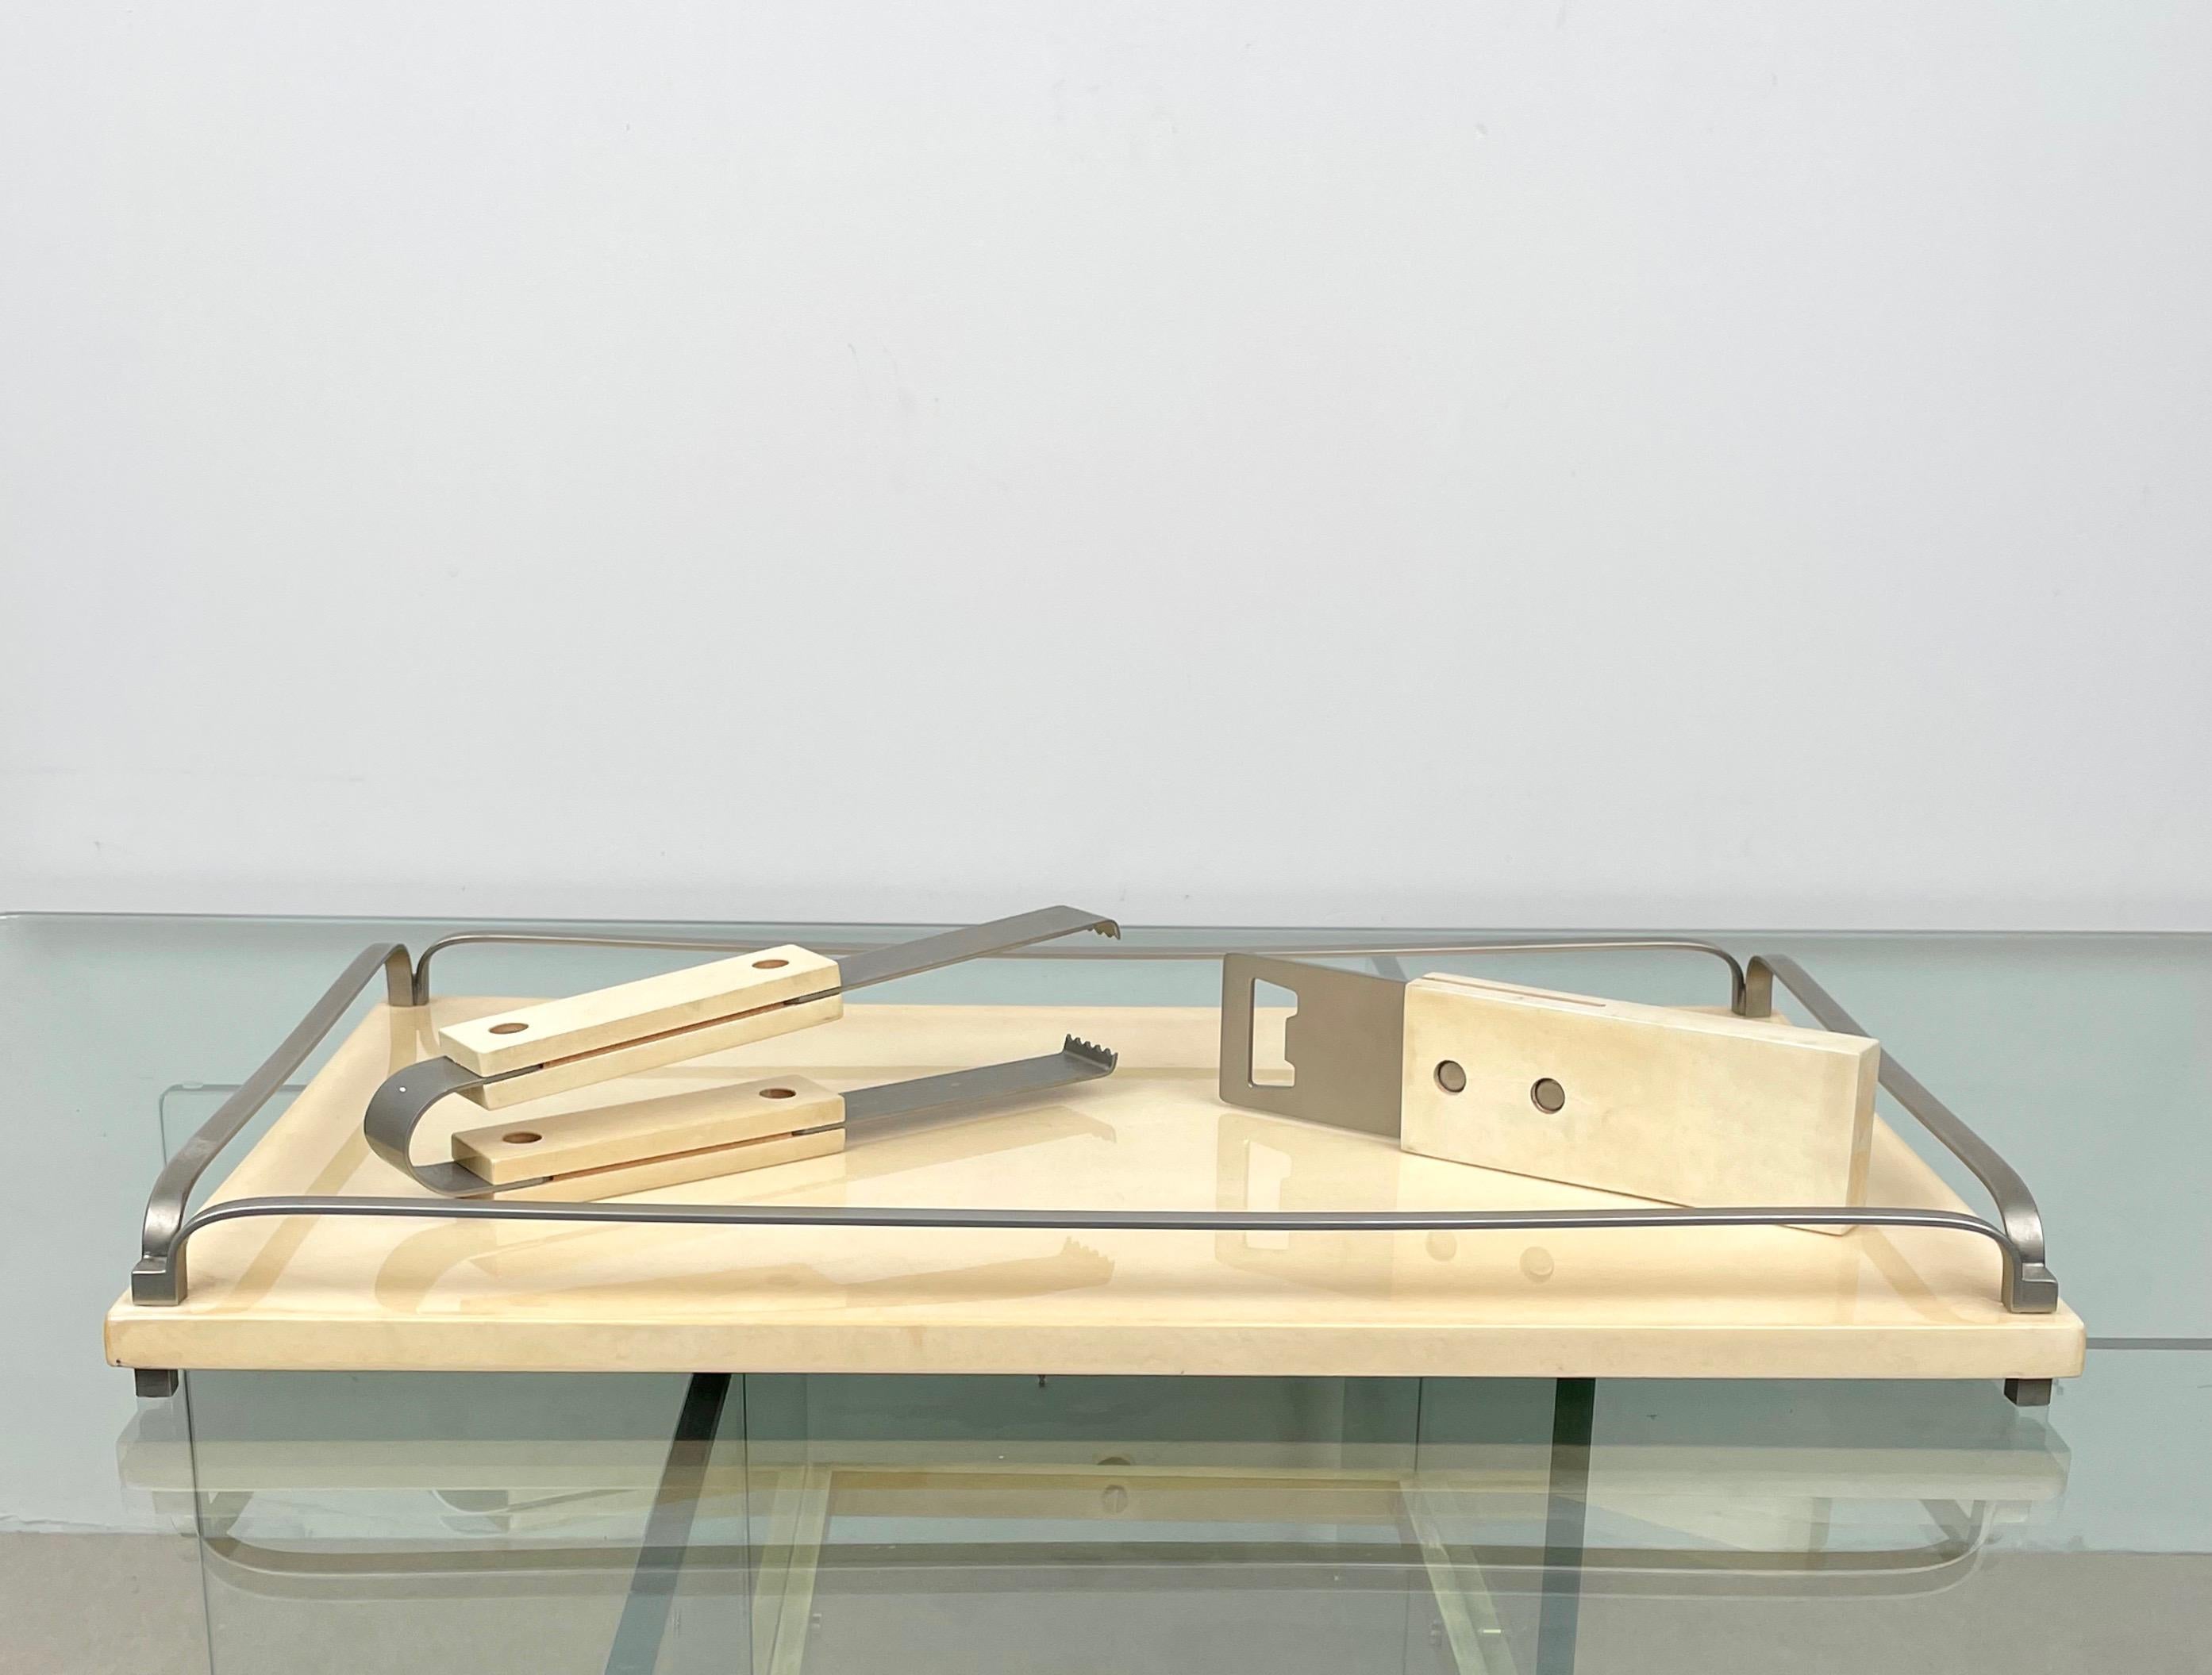 Barware set composed of a serving tray, tongs and corkscrew in white goatskin and steel details by the Italian designer Aldo Tura. Made in Italy in the 1950s.

The original label is still attached, as shown in the pictures.